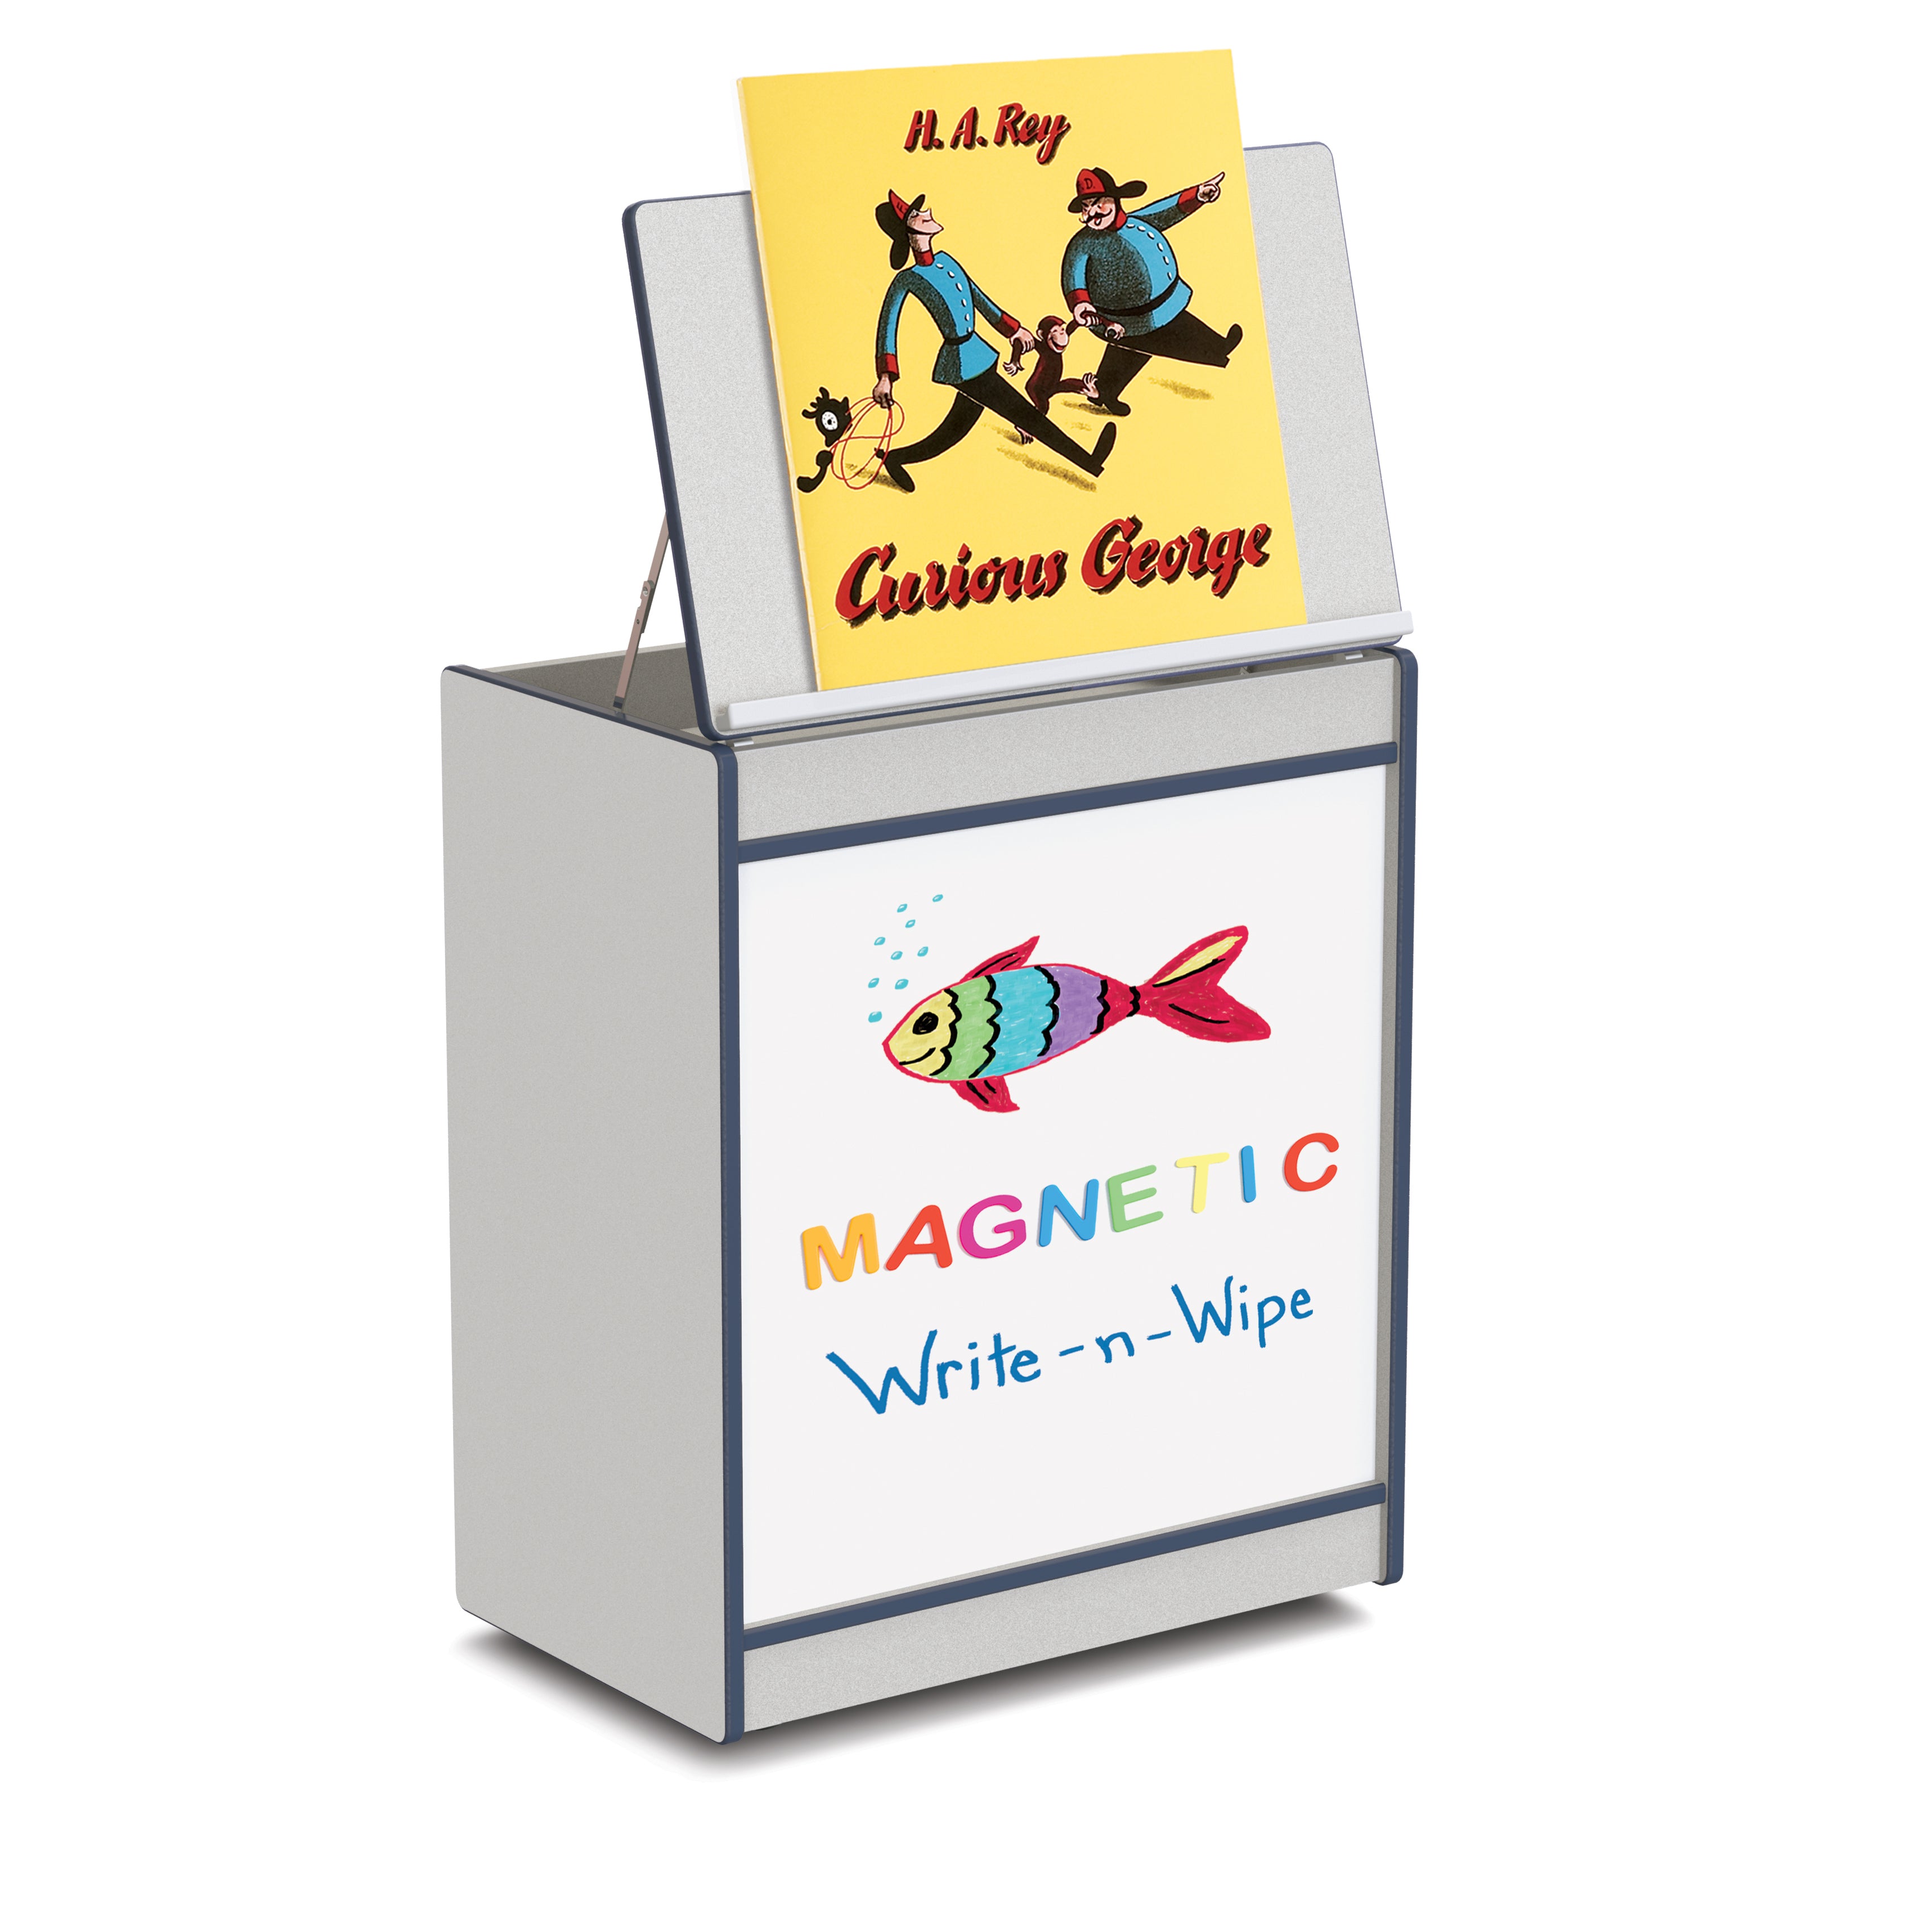 0543JCMG112, Rainbow Accents Big Book Easel - Magnetic Write-n-Wipe - Navy